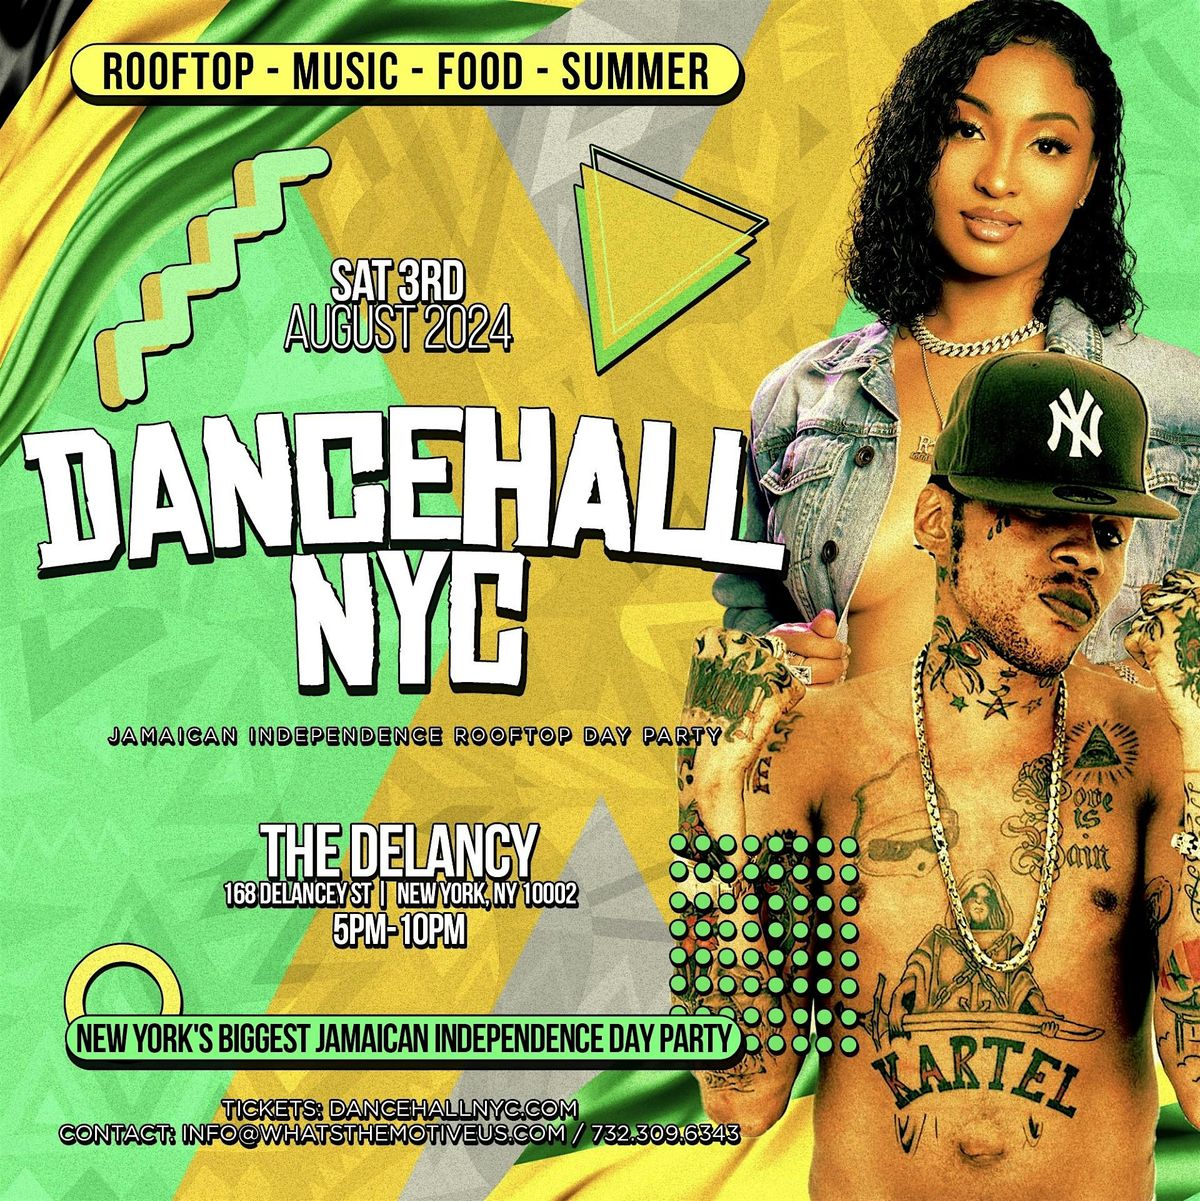 DANCEHALL NYC - Jamaican Independence Rooftop Day Party